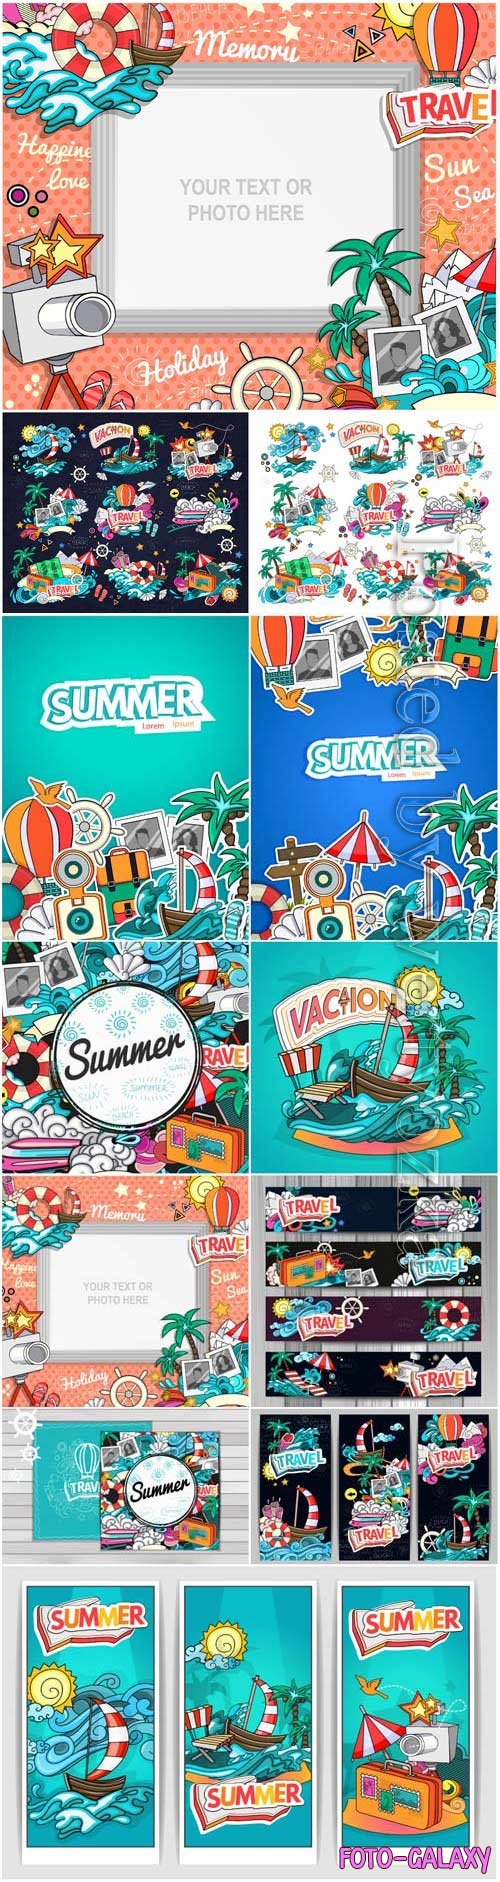 Summer banners and backgrounds in vector